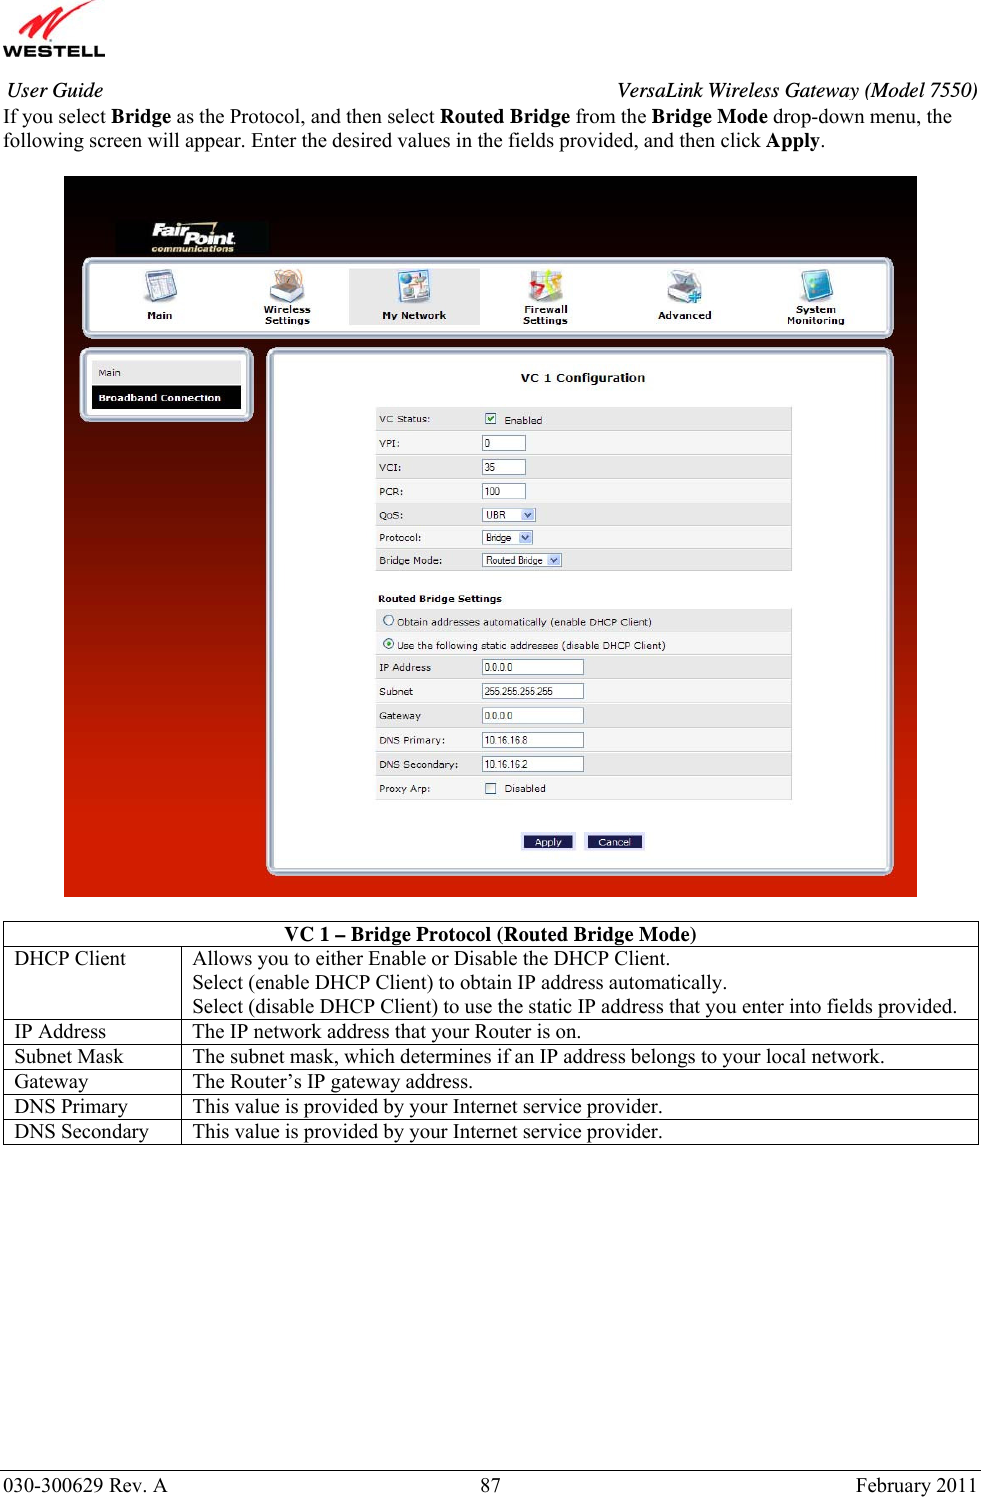       030-300629 Rev. A  87       February 2011 User Guide  VersaLink Wireless Gateway (Model 7550)If you select Bridge as the Protocol, and then select Routed Bridge from the Bridge Mode drop-down menu, the following screen will appear. Enter the desired values in the fields provided, and then click Apply.     VC 1 – Bridge Protocol (Routed Bridge Mode) DHCP Client  Allows you to either Enable or Disable the DHCP Client. Select (enable DHCP Client) to obtain IP address automatically. Select (disable DHCP Client) to use the static IP address that you enter into fields provided. IP Address  The IP network address that your Router is on. Subnet Mask  The subnet mask, which determines if an IP address belongs to your local network. Gateway  The Router’s IP gateway address. DNS Primary  This value is provided by your Internet service provider. DNS Secondary  This value is provided by your Internet service provider.            